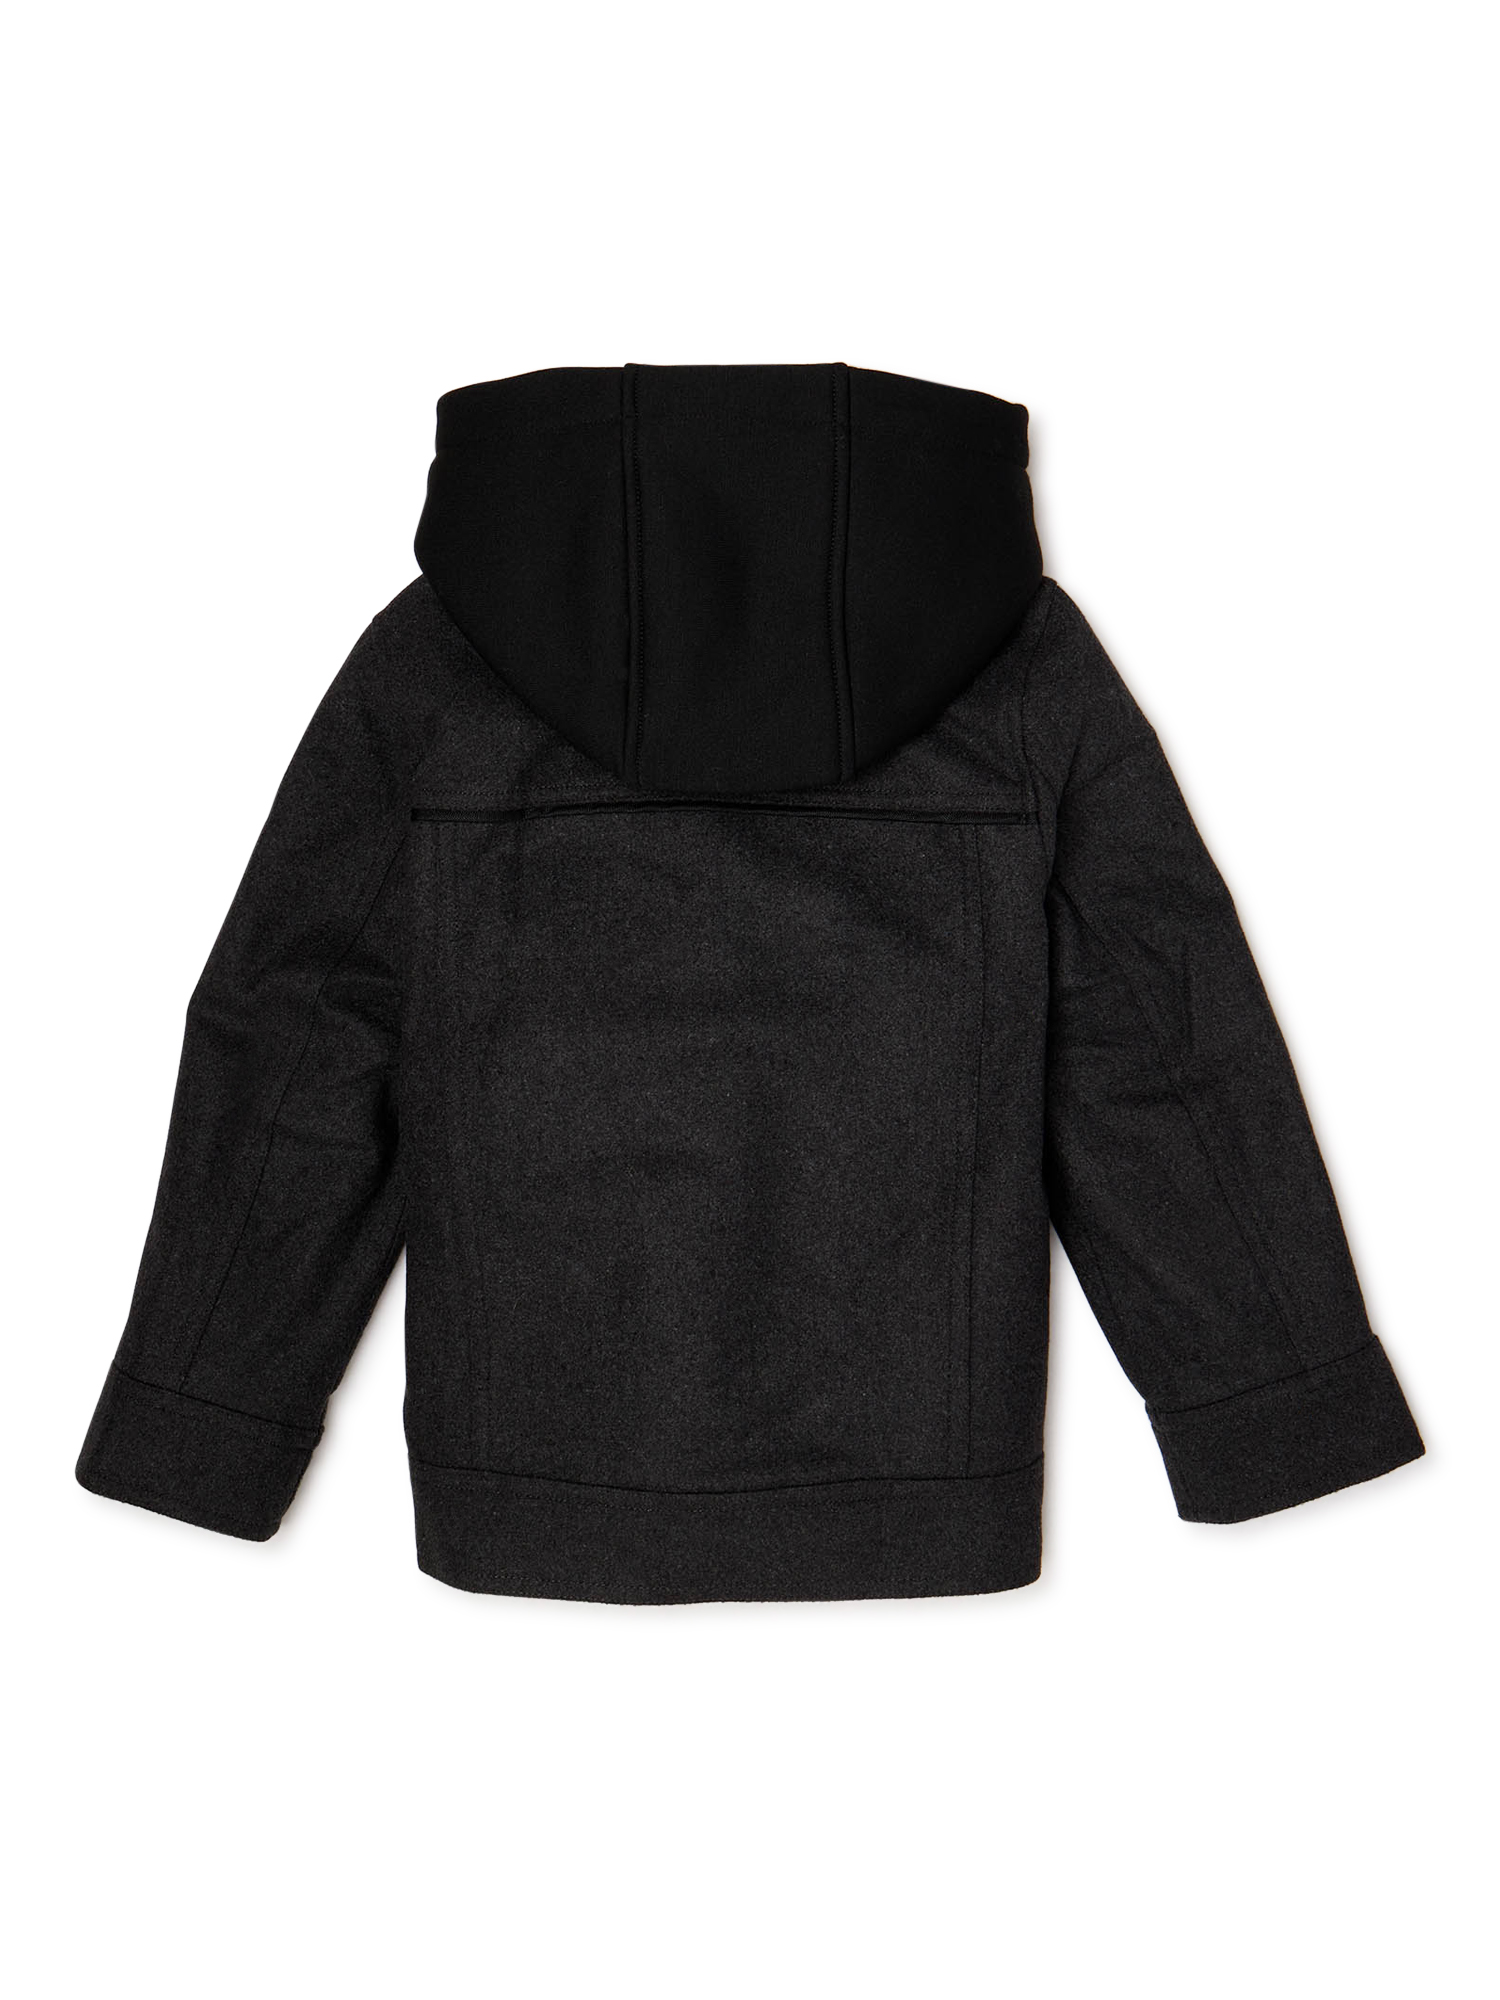 Urban Republic Boys Officer Jacket with Faux Sherpa Hood & Lining, Sizes 4-20 - image 2 of 3